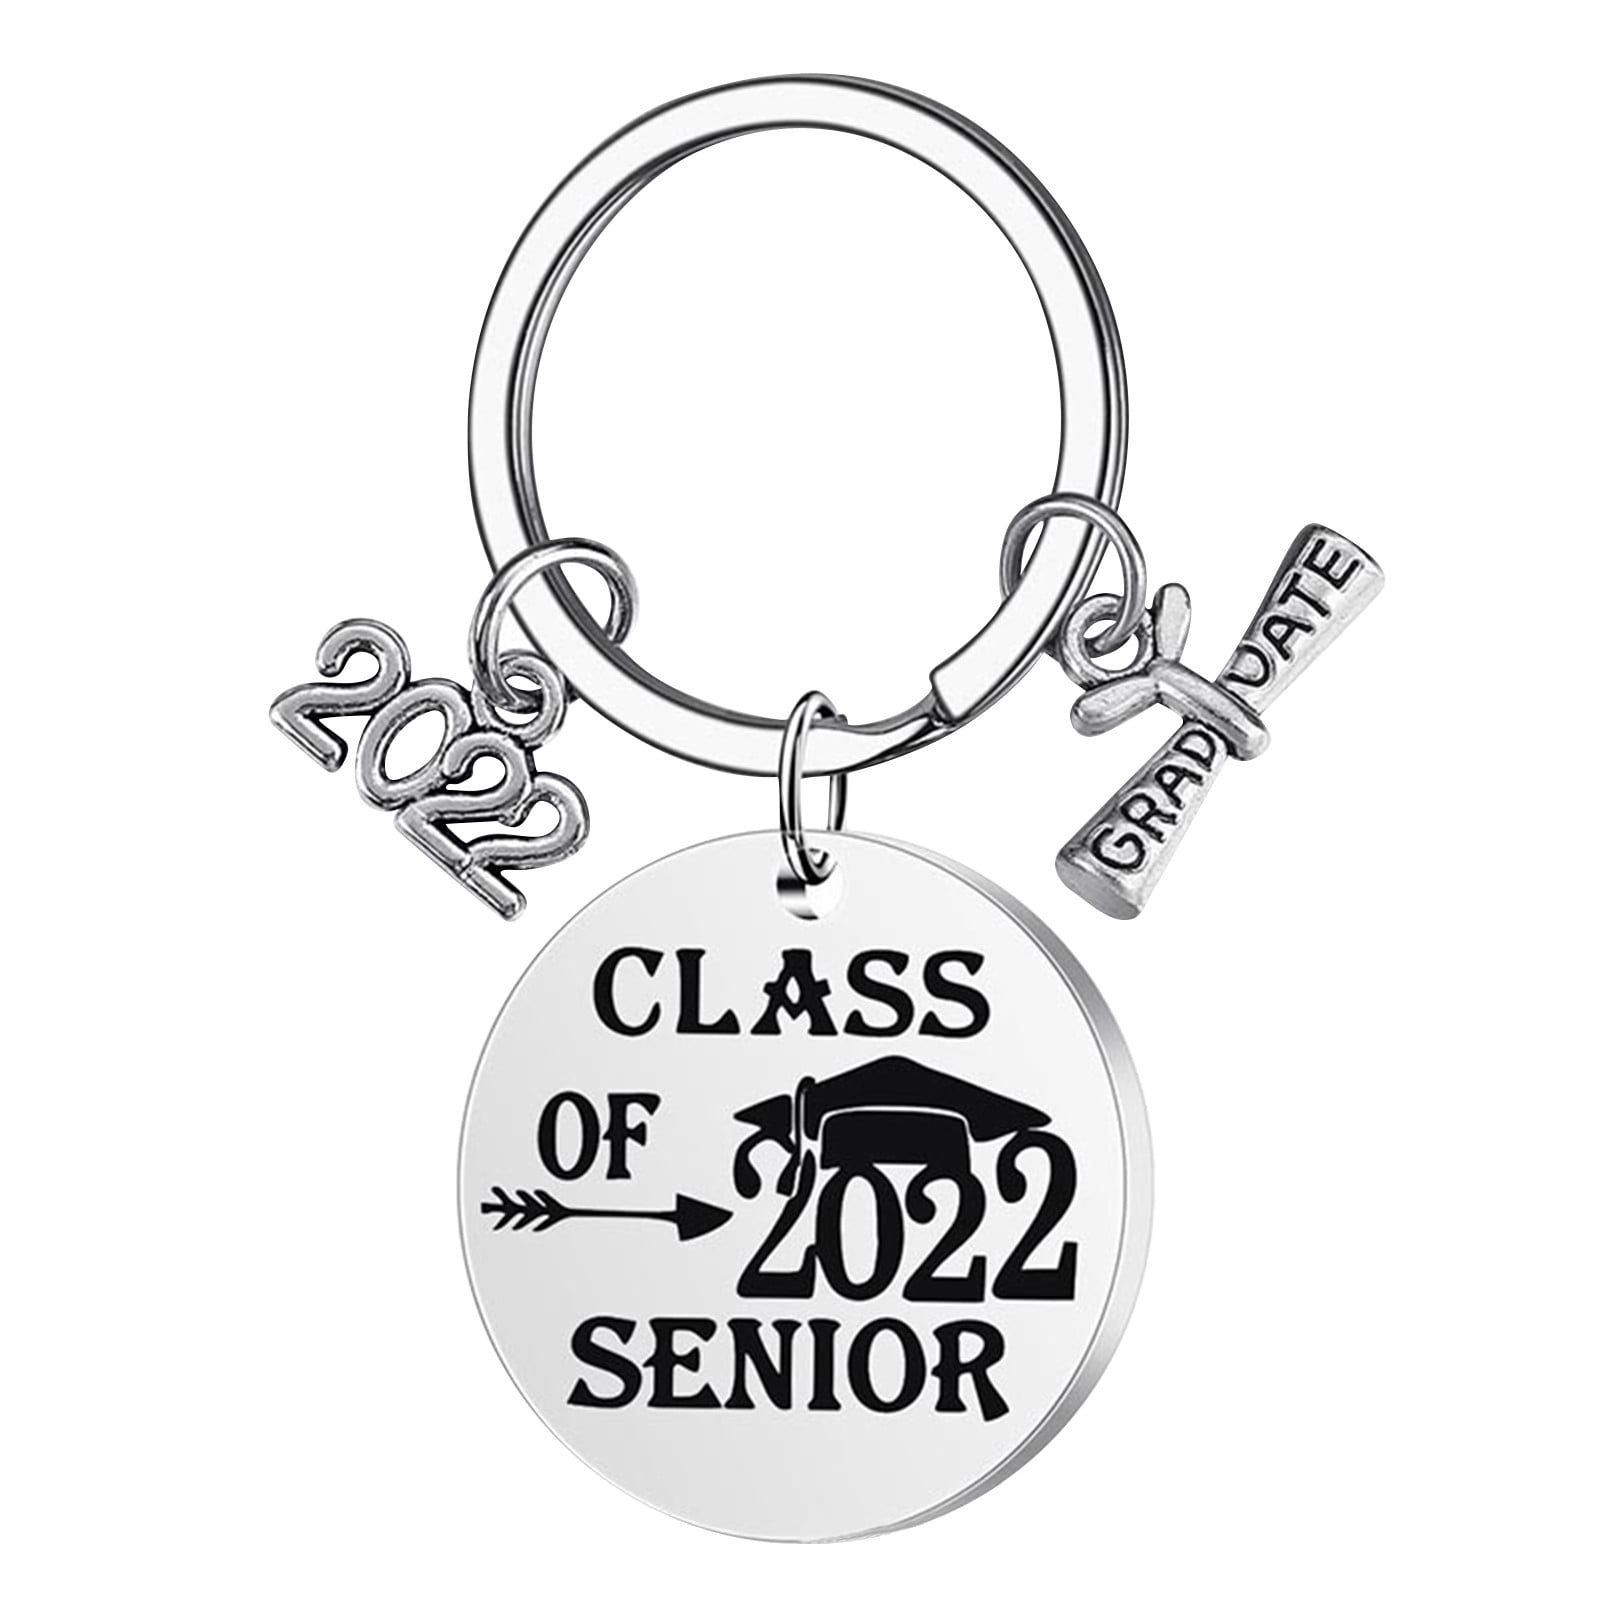 Class of 2020 Keychain Engraving Round Letter Personality Graduation Memorial Keychain Alloy Jewelry Accessories Gold College Graduation Gifts for Classmates Minimalist Keychain 